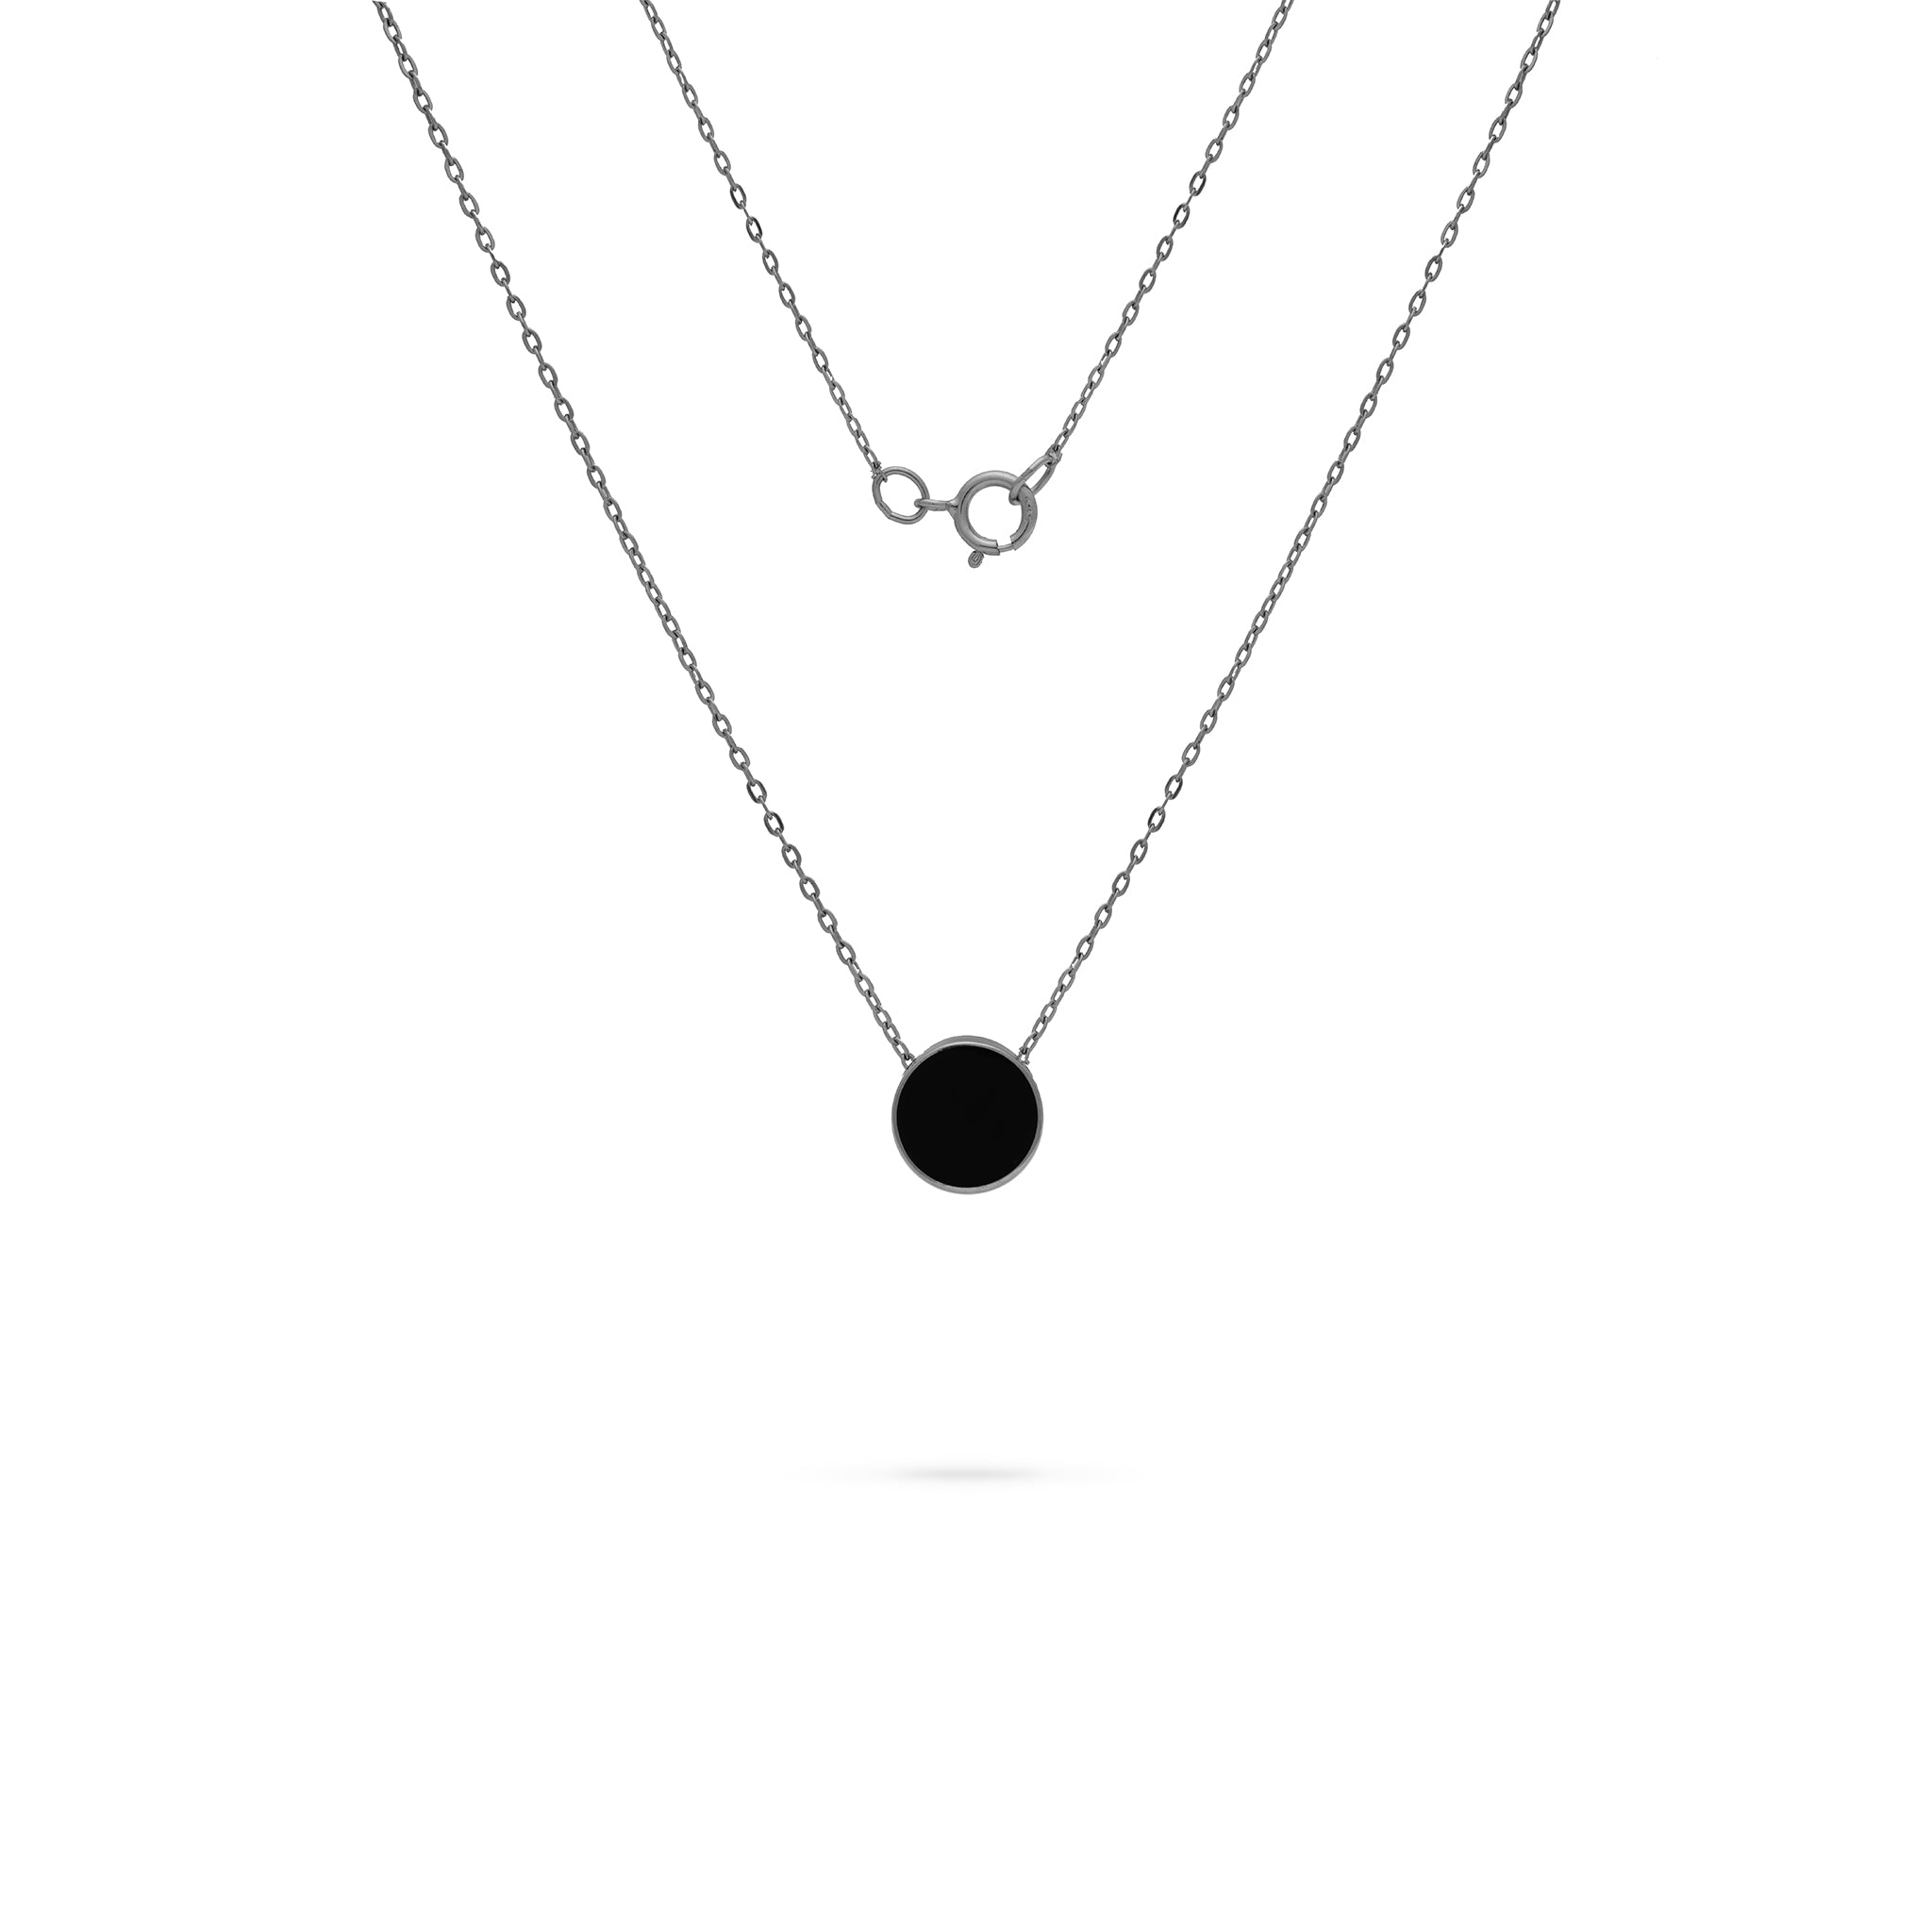 16-18" Adjustable Eclipse Flipside Black Coral & Mother of Pearl Necklace in White Gold - 9mm